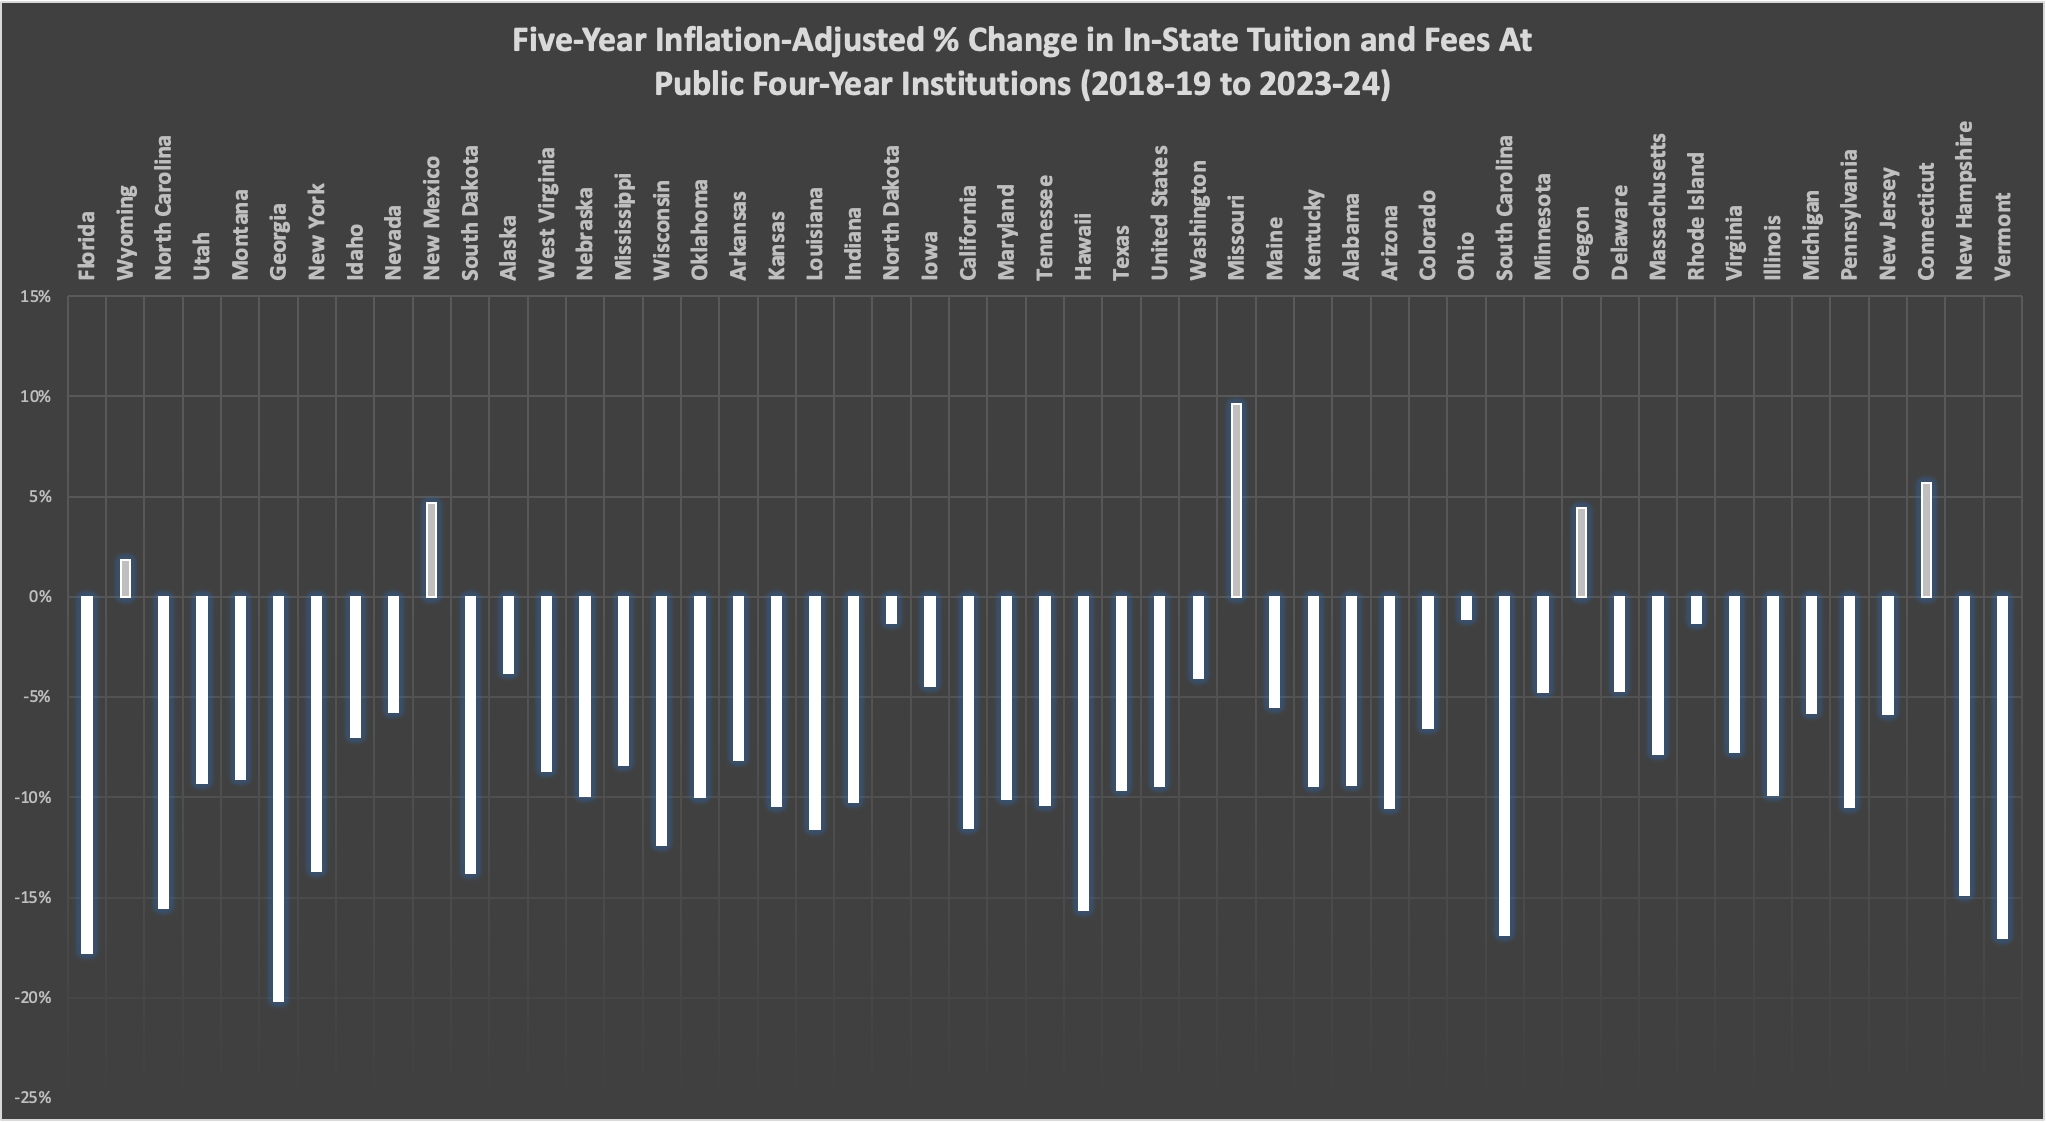 Five-Year Inflation-Adjusted % Change in In-State Tuition and Fees At Public Four-Year Institutions (2018-19 to 2023-24) 